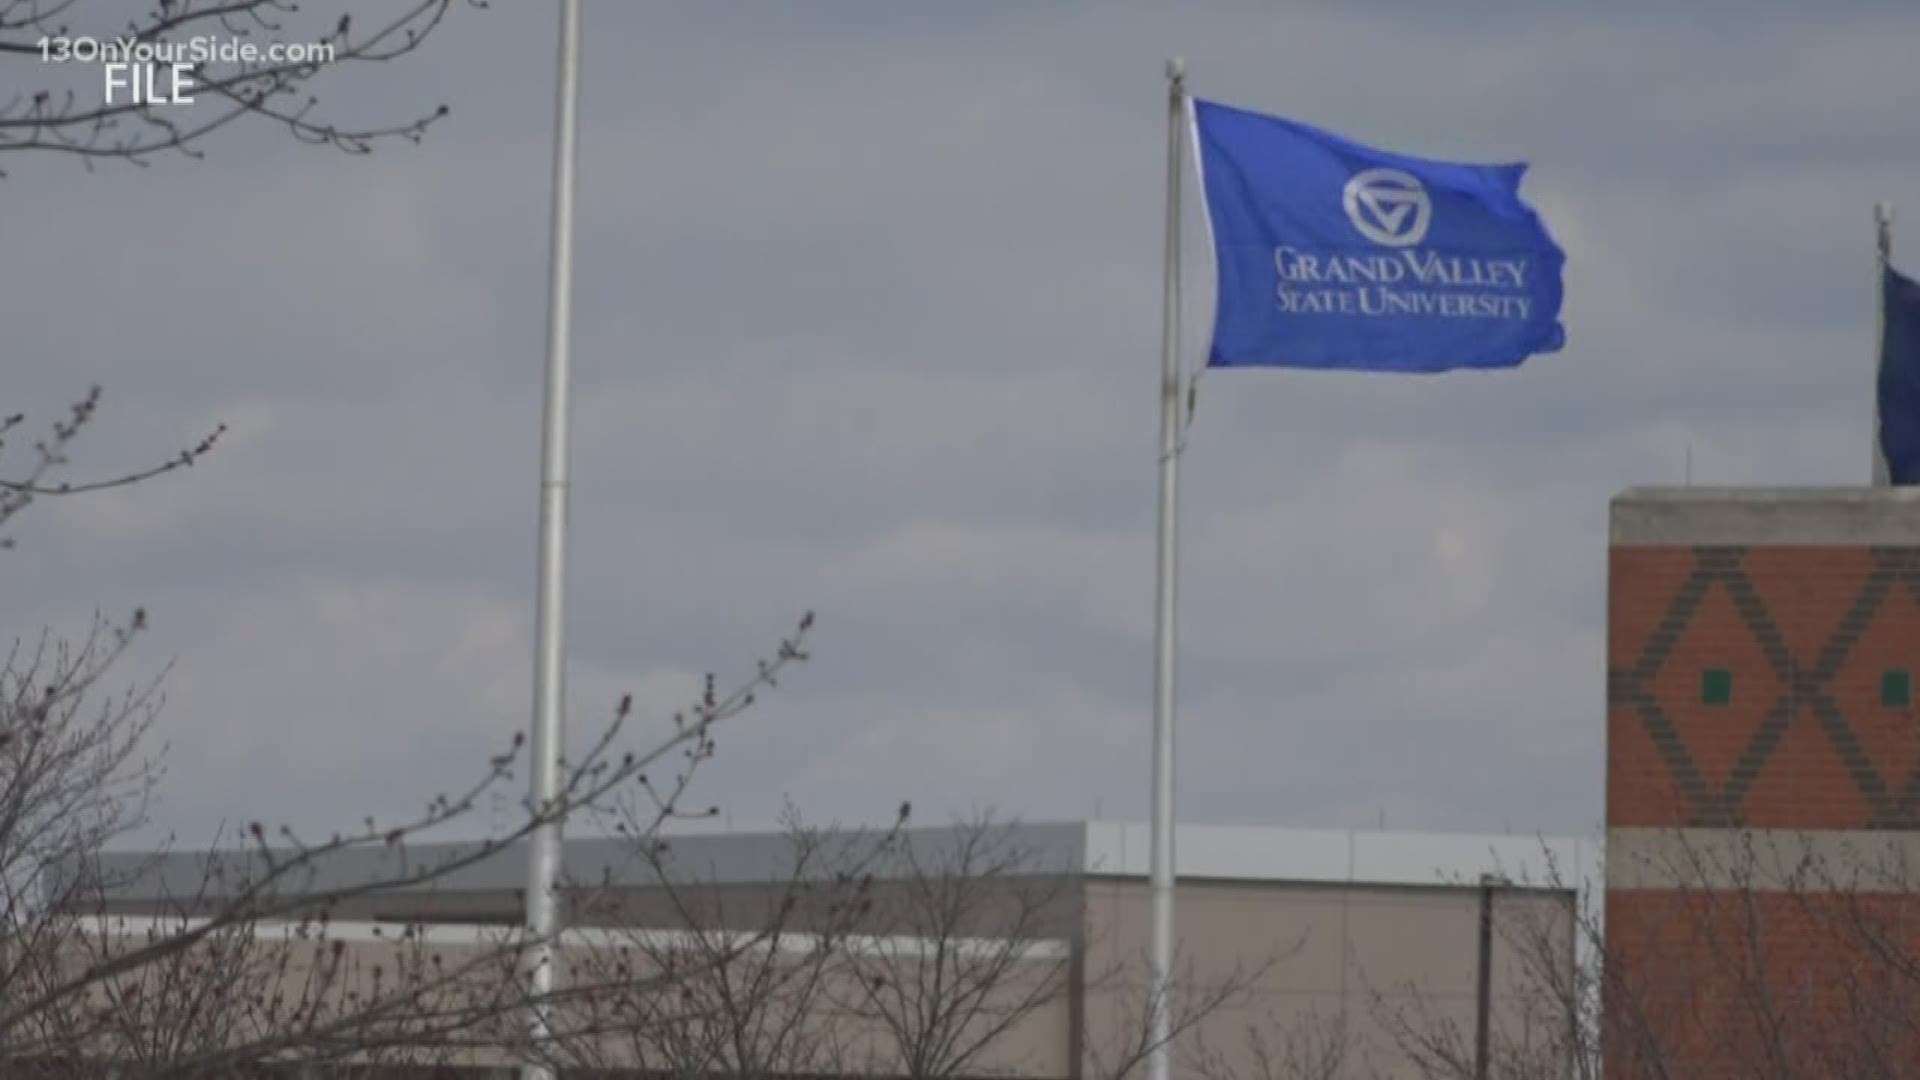 The Grand Valley State University Student Senate has decided to bring back the Pledge of Allegiance after voting to stop saying it at meetings last week.